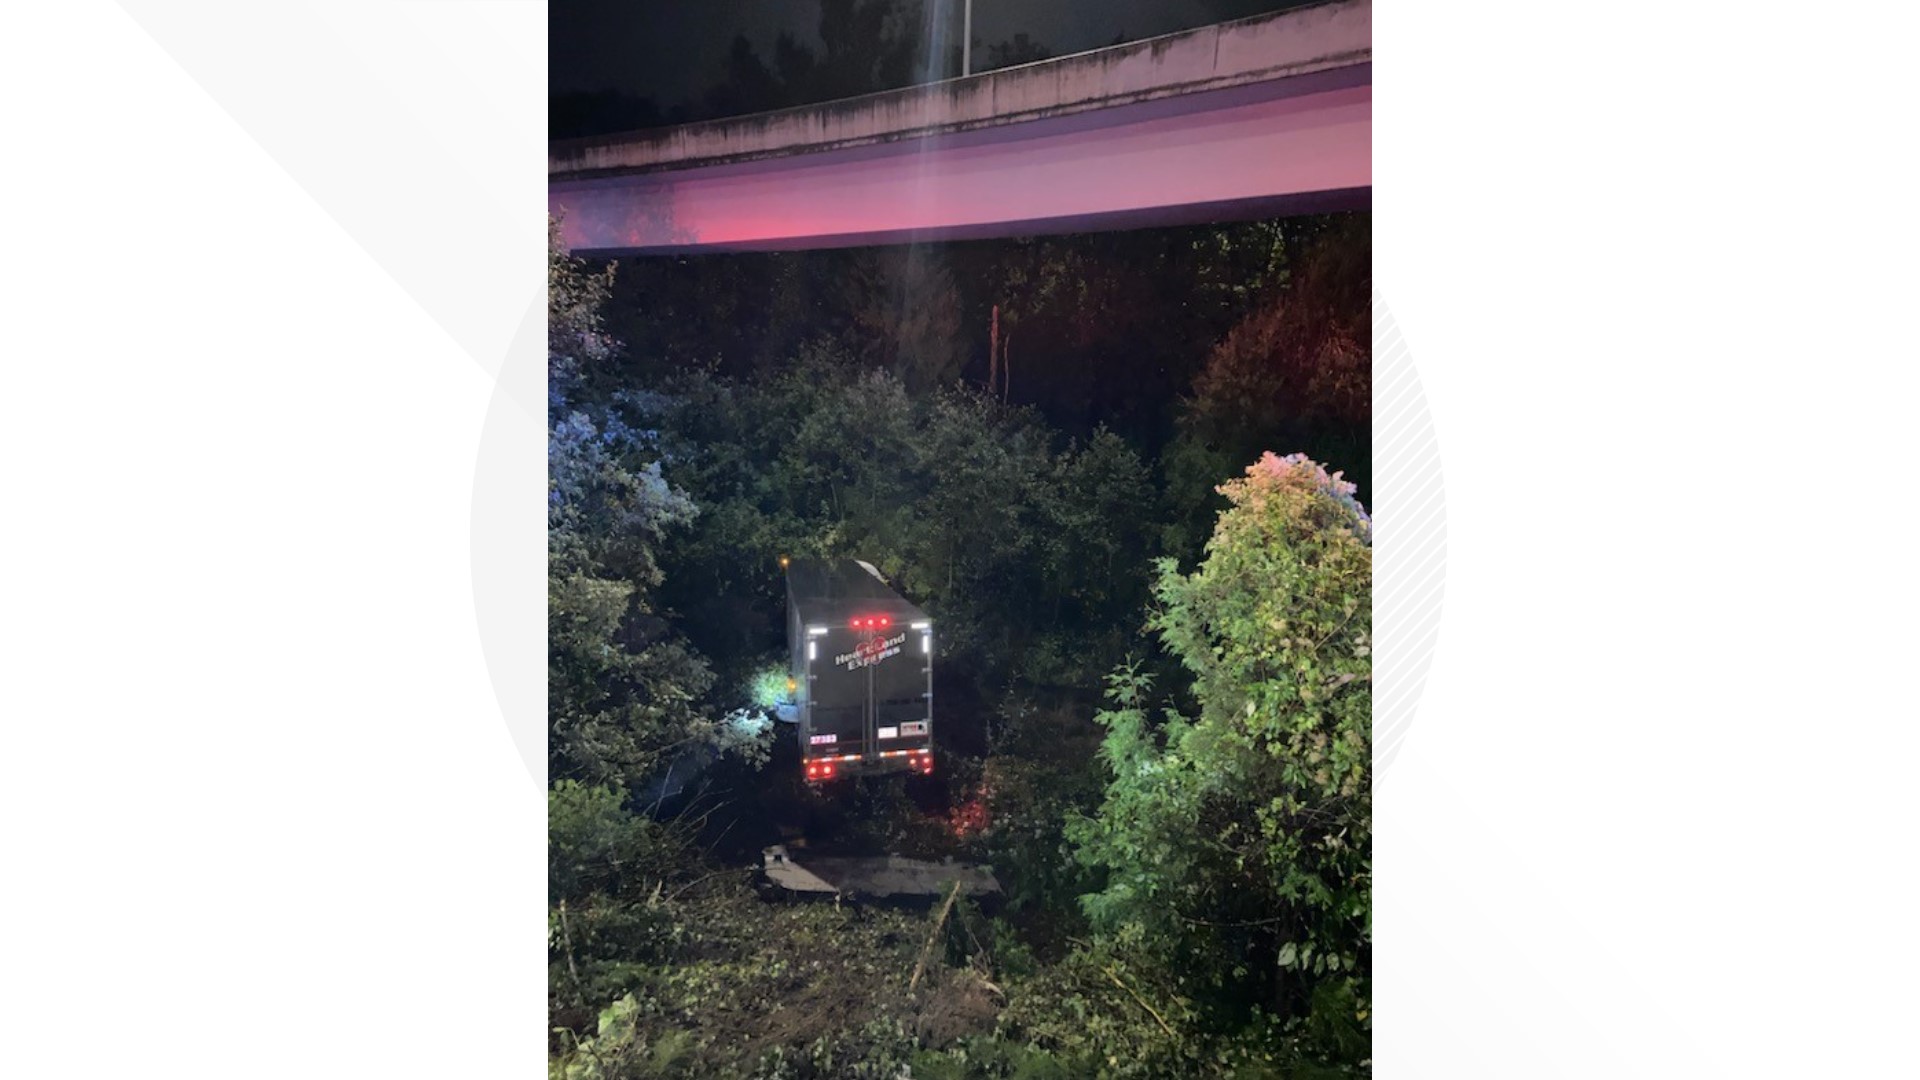 A semi-truck lost control while traveling northbound on Interstate 5 Wednesday morning. The semi hit a concrete barrier before going down an embankment.